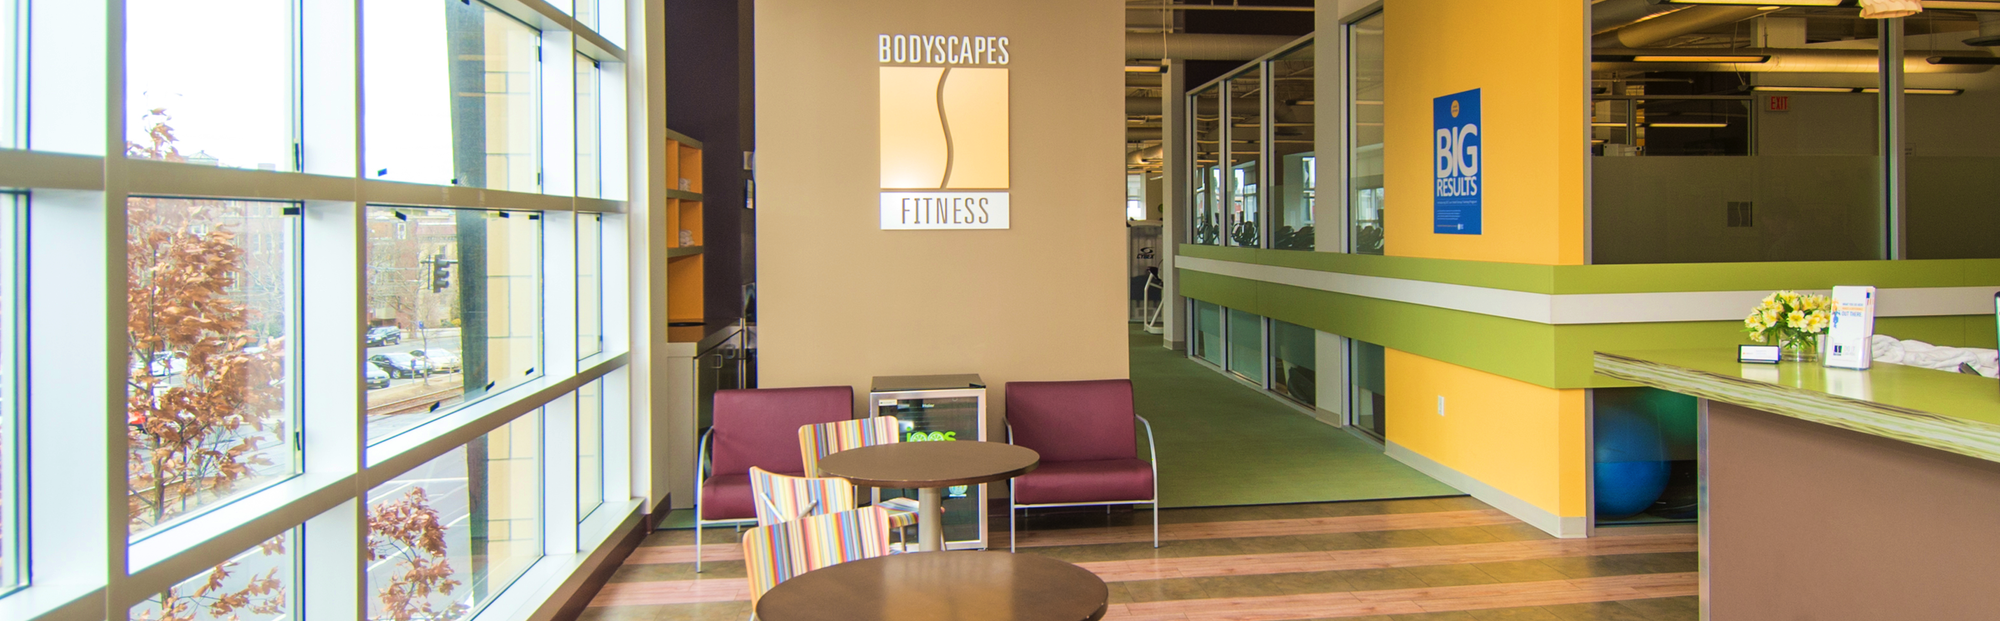 BodyScapes Fitness Center Logo Wall